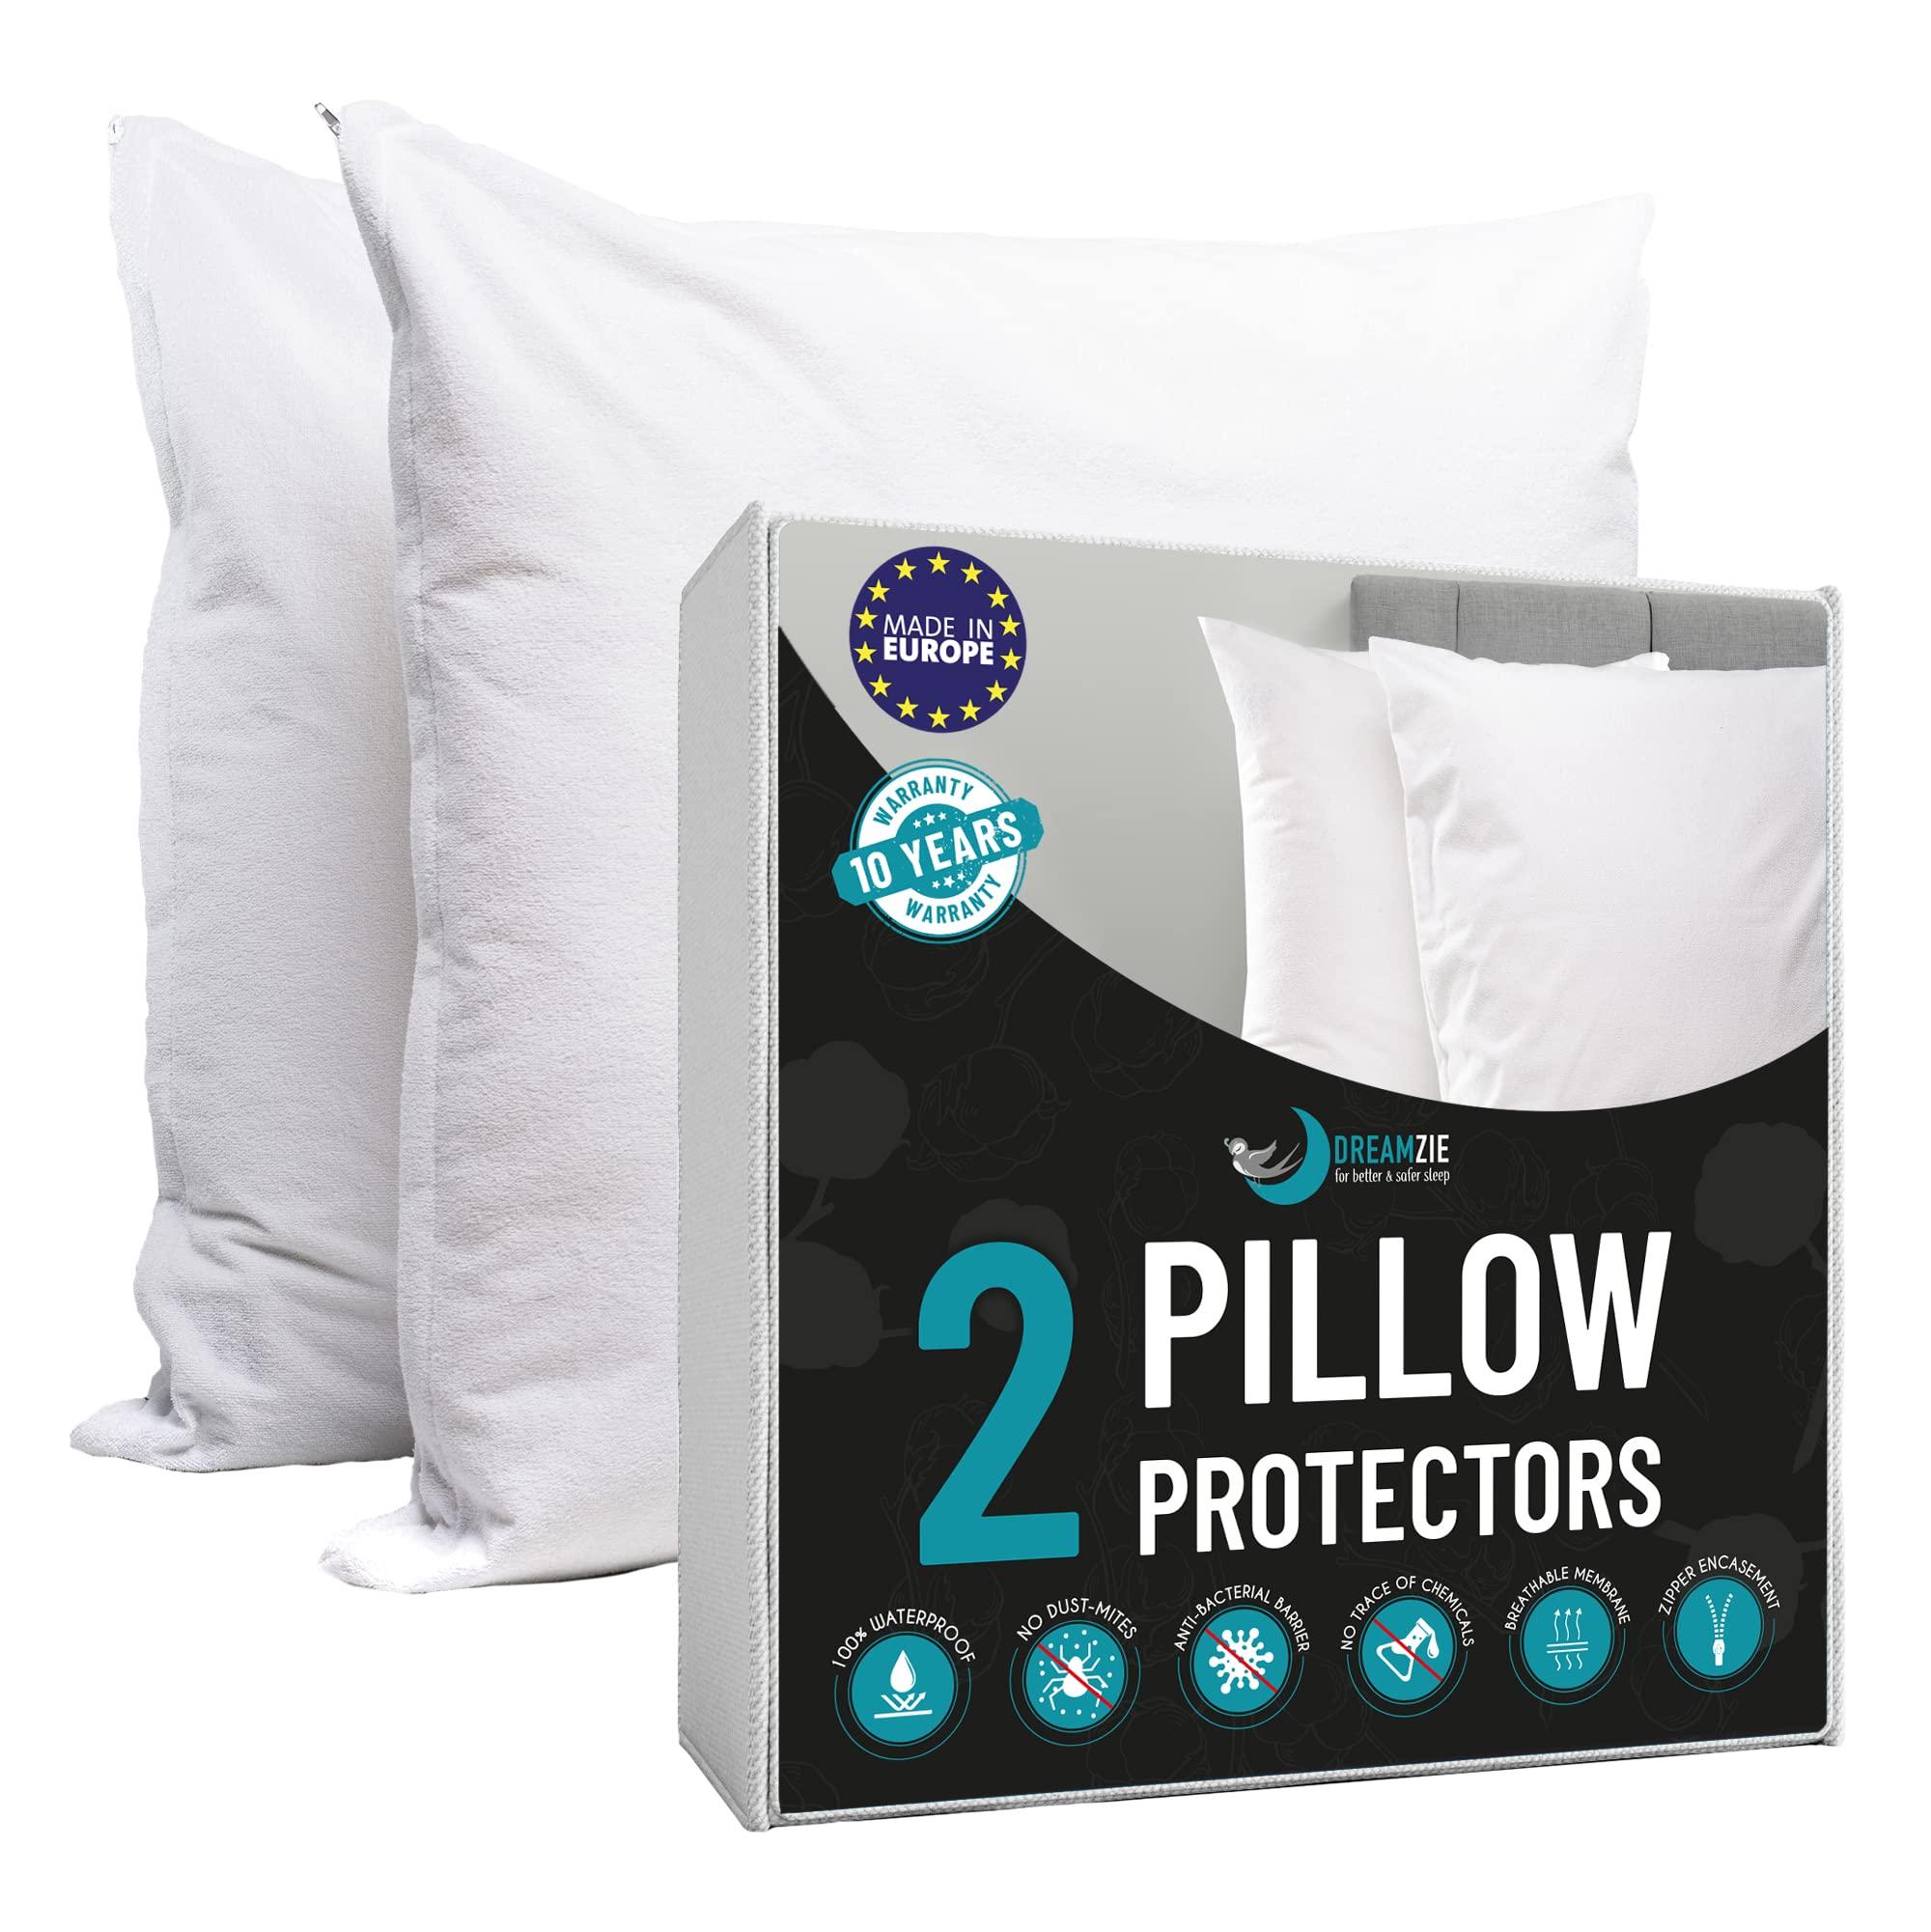 Dreamzie - Pack of 2 Pillow Protector Waterproof with Zipper - For Pillows 40 x 70 cm - White Cotton Outer Cover Oeko Tex® - Breathable, Hypoallergenic, Anti-Dust Mite, Anti-Bacterial